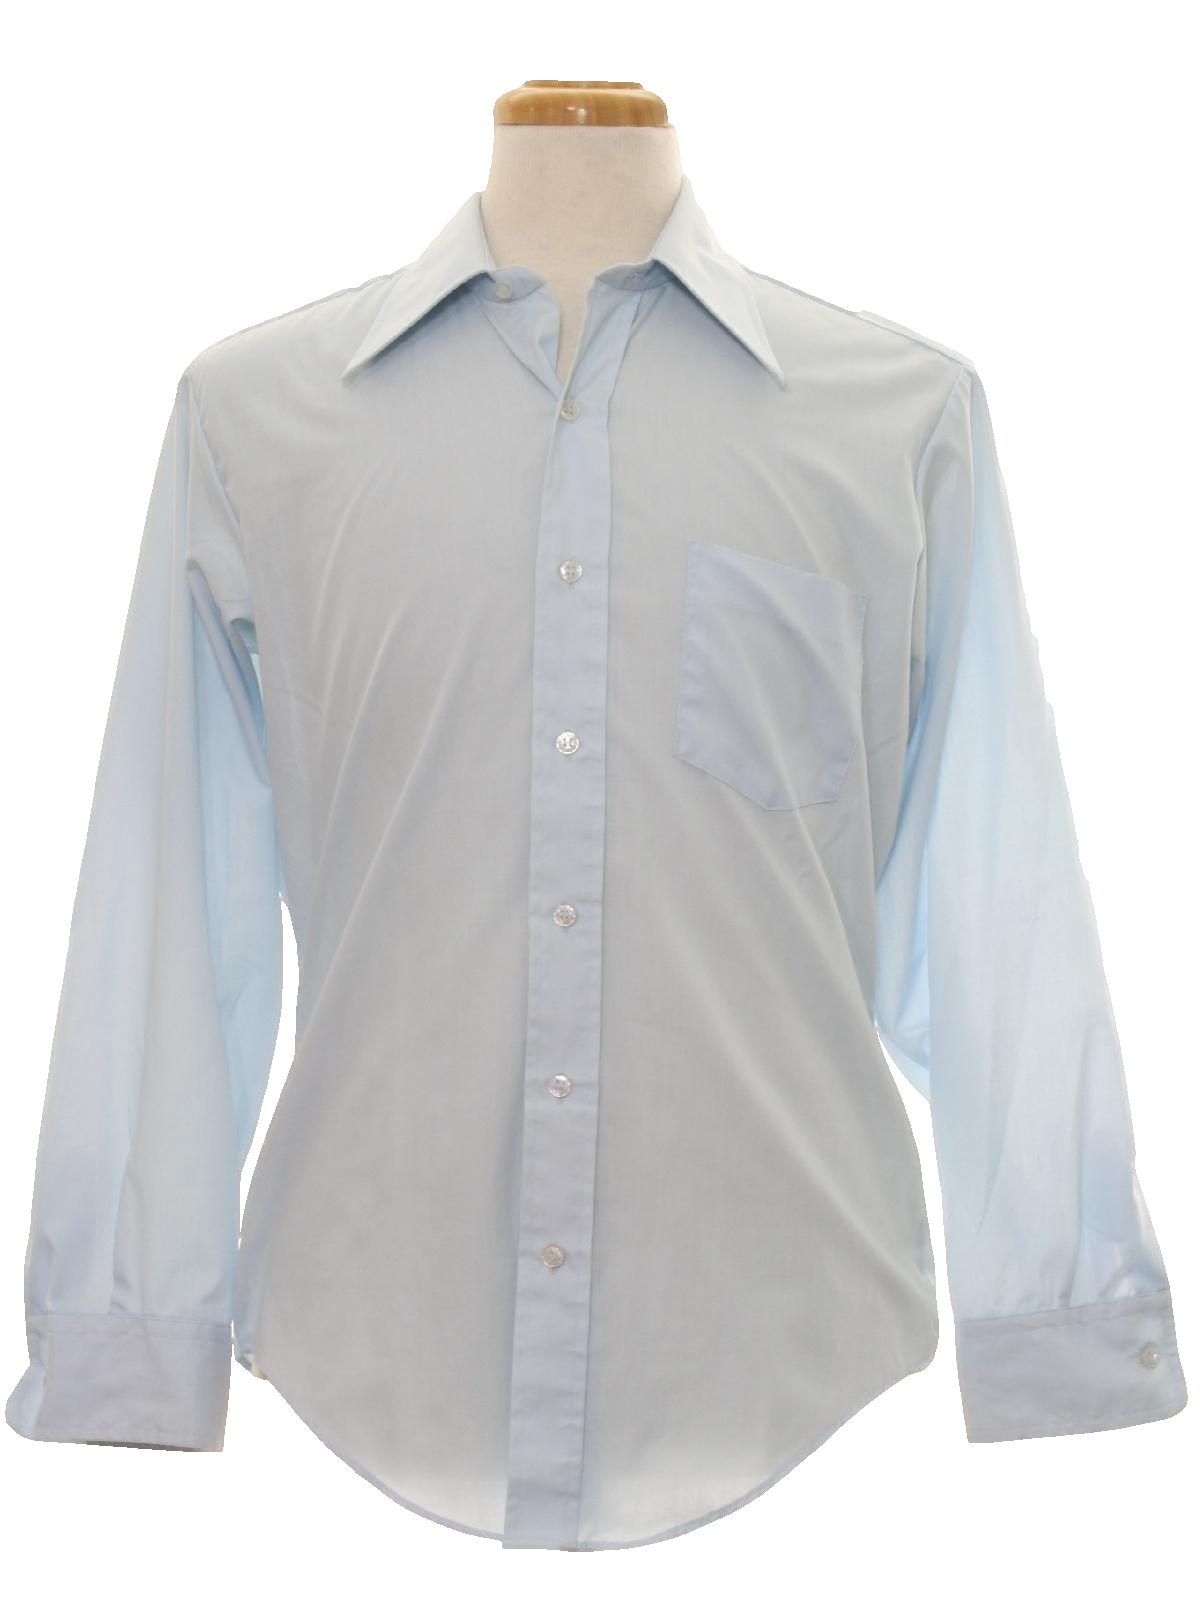 1970s Vintage Shirt: 70s -JCPenney- Mens baby blue, blended cotton ...